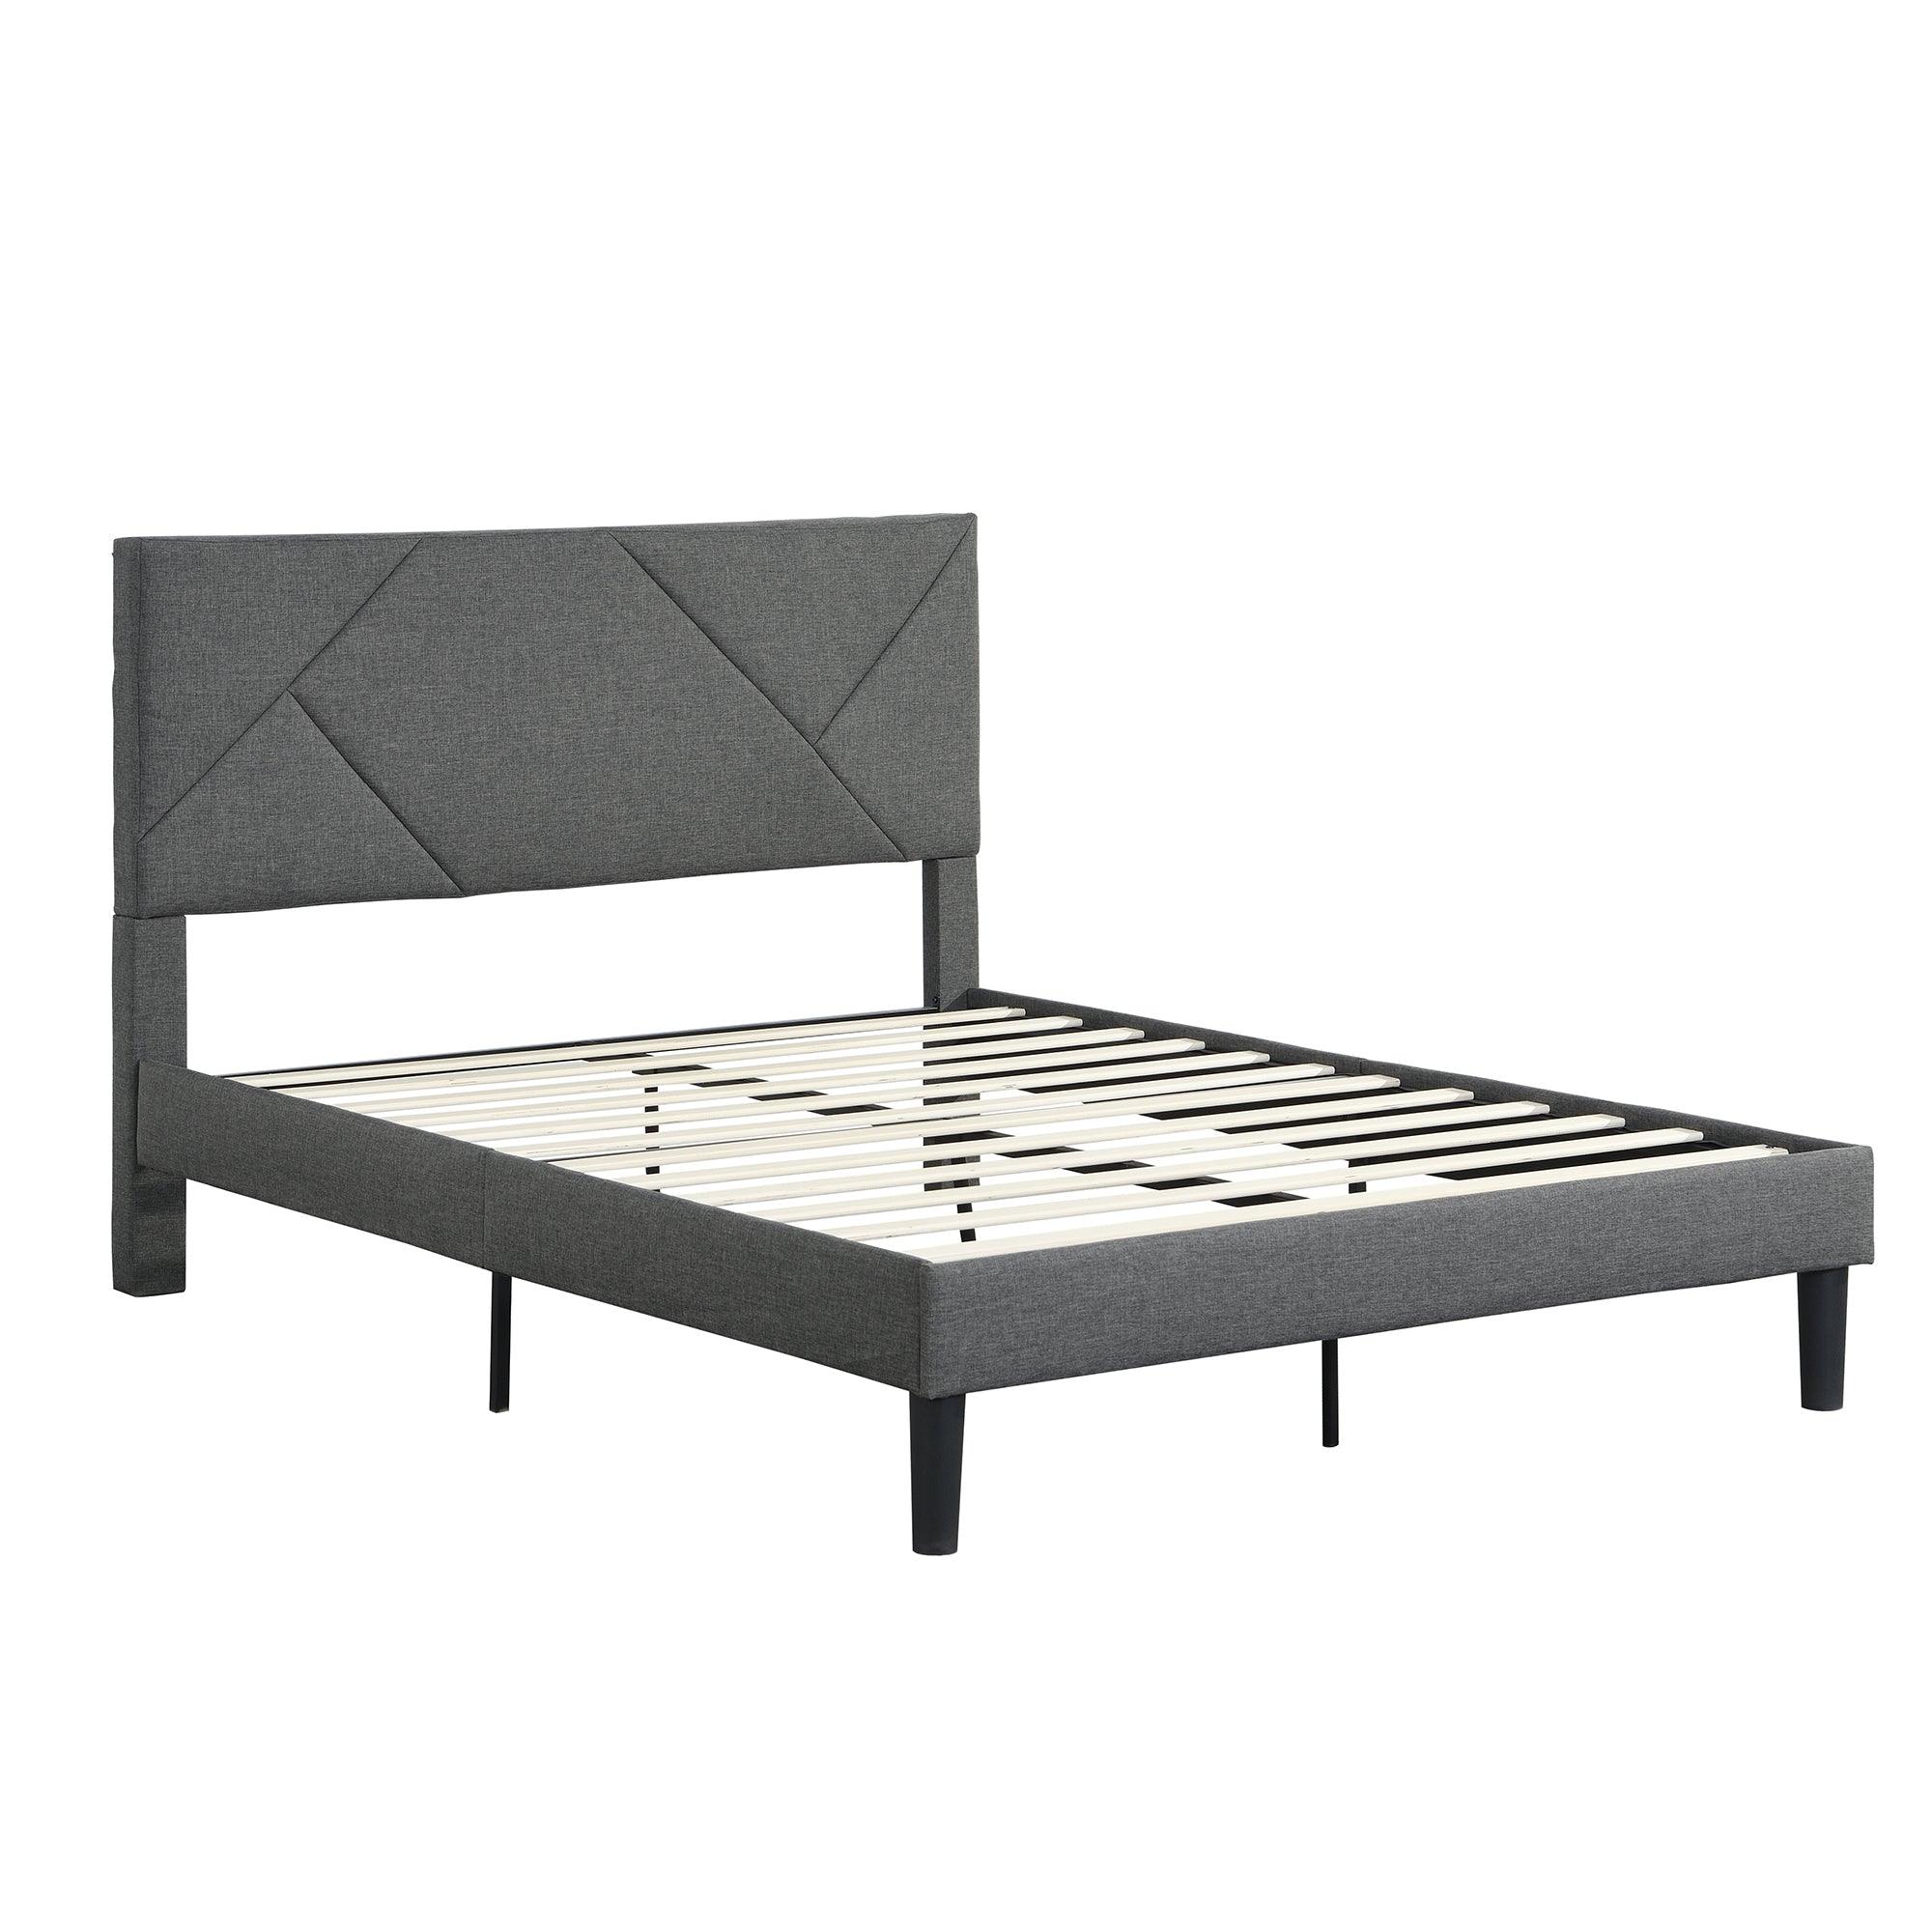 🆓🚛 Queen Size Upholstered Platform Bed Frame With Headboard, Strong Wood Slat Support, Mattress Foundation, No Box Spring Needed, Easy Assembly, Gray